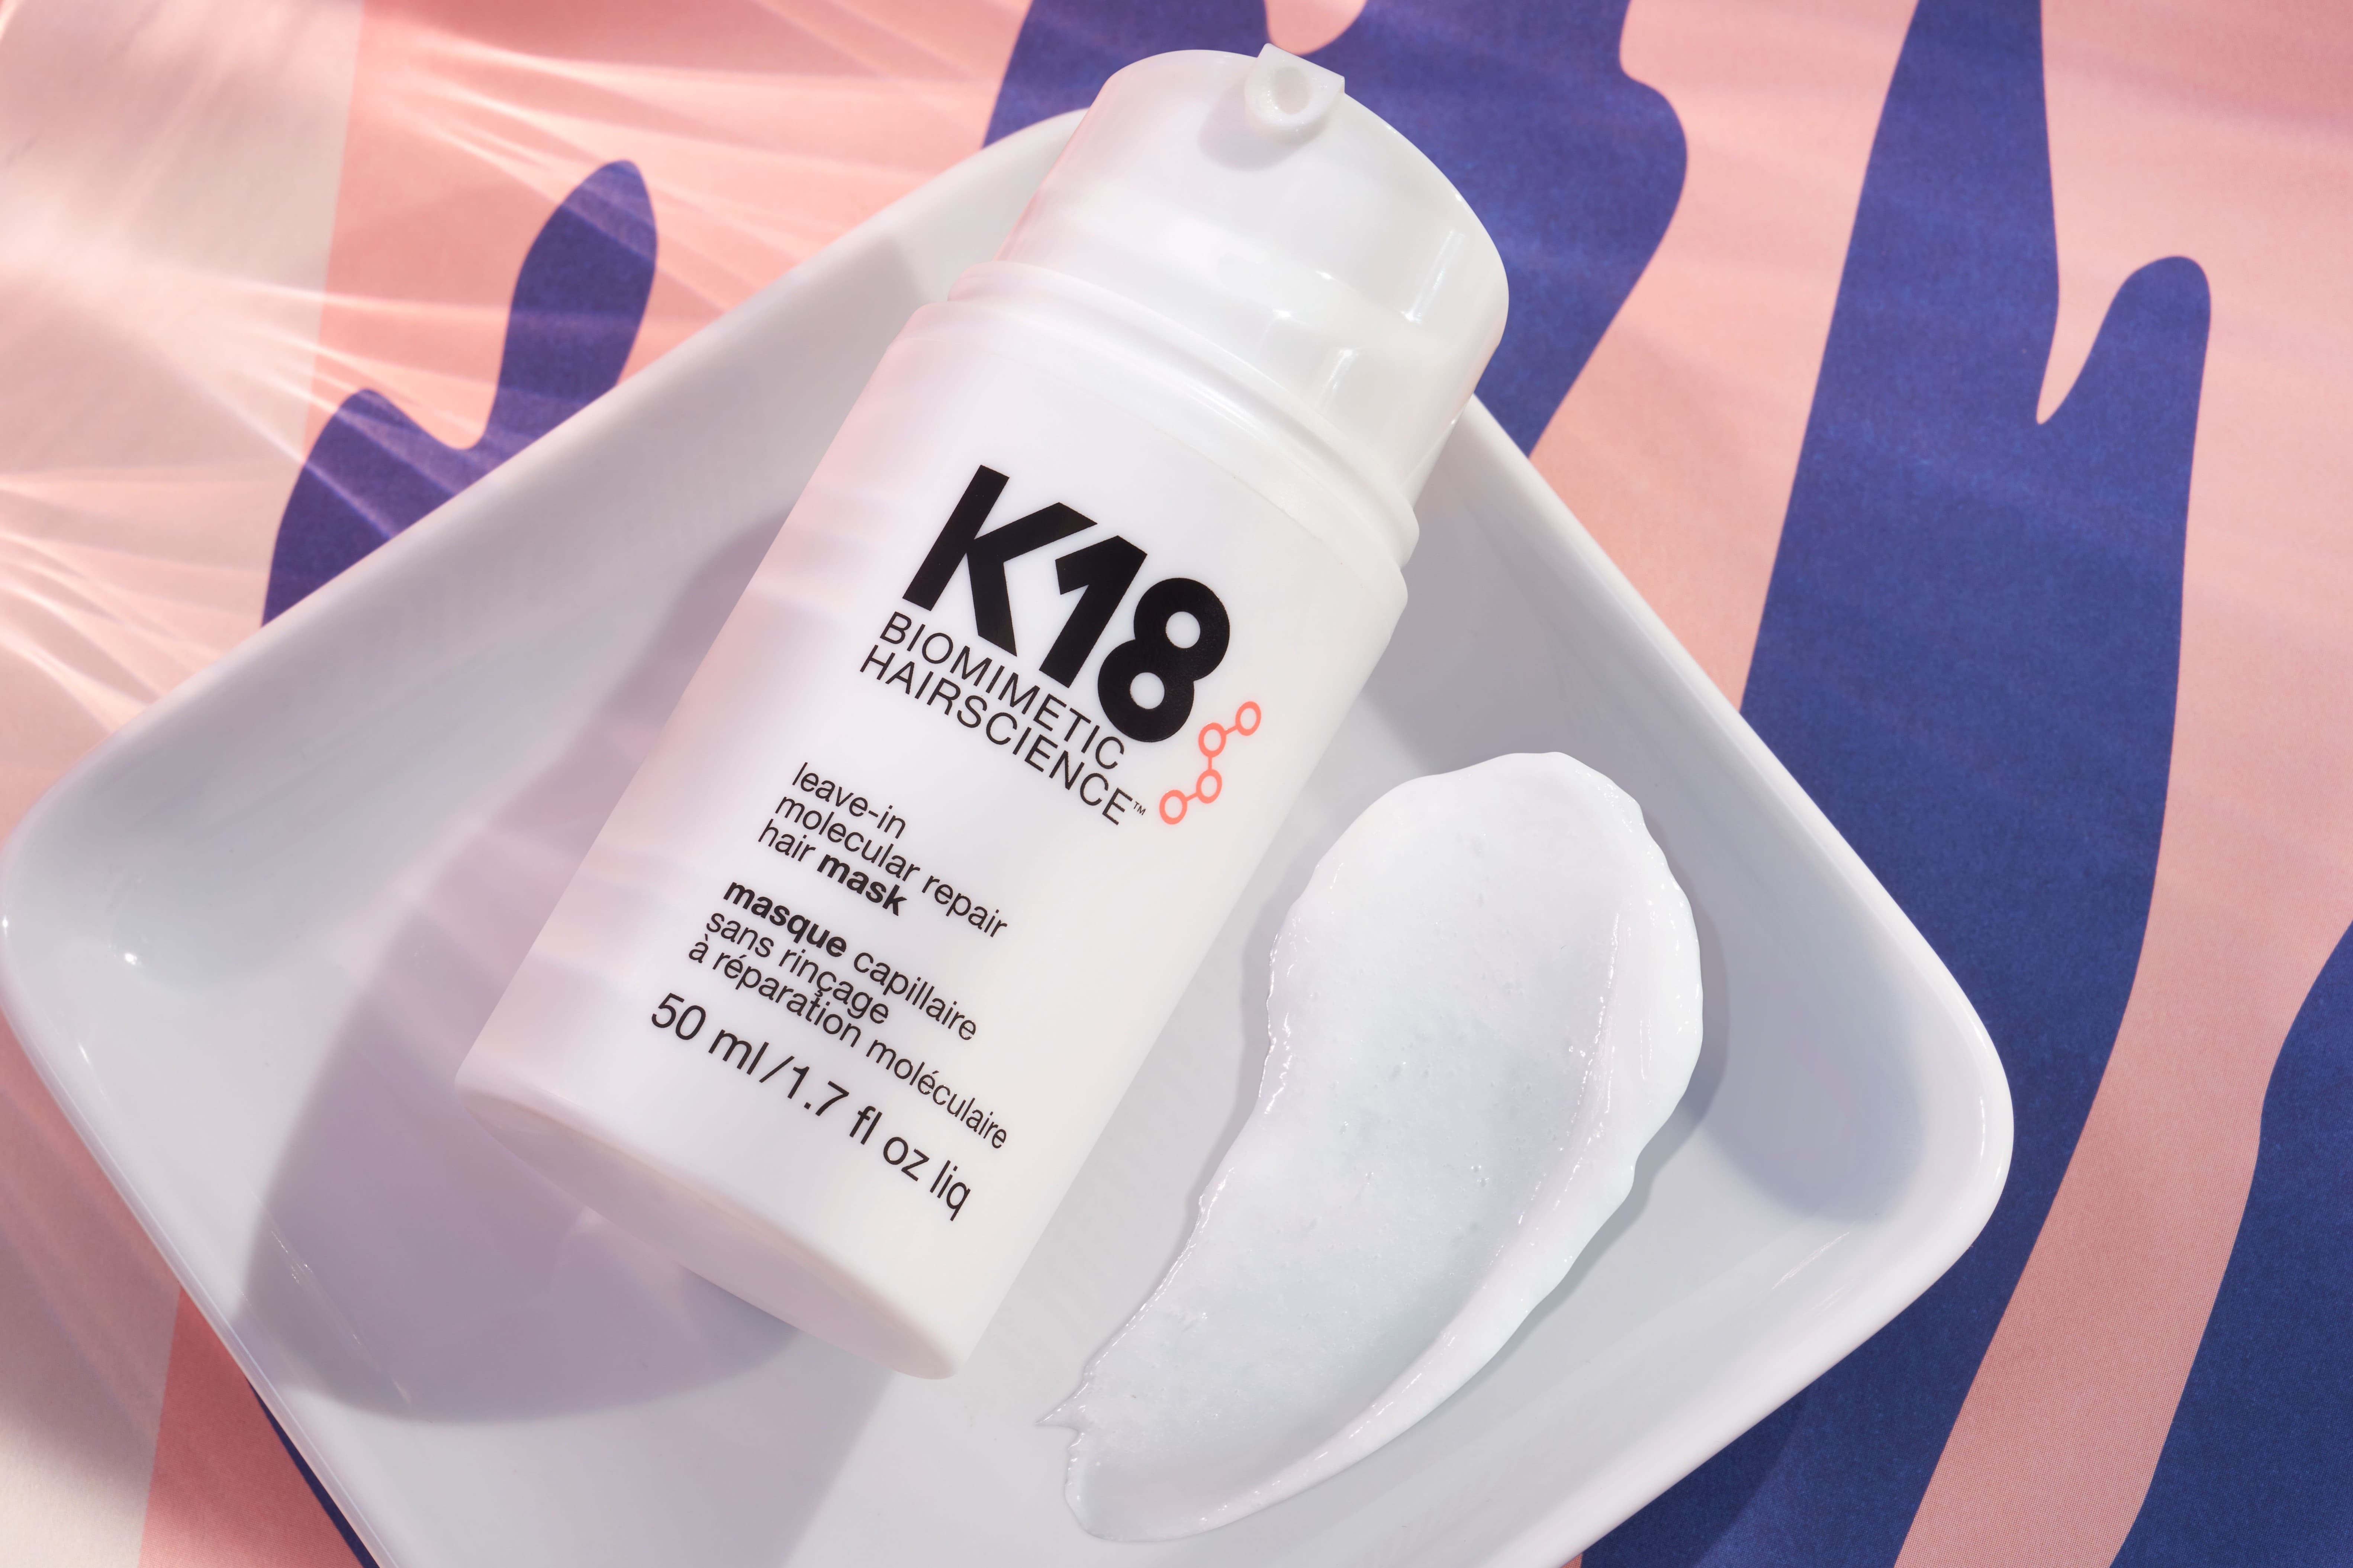 K18 Hair Mask Review: Is It Worth Investing In?